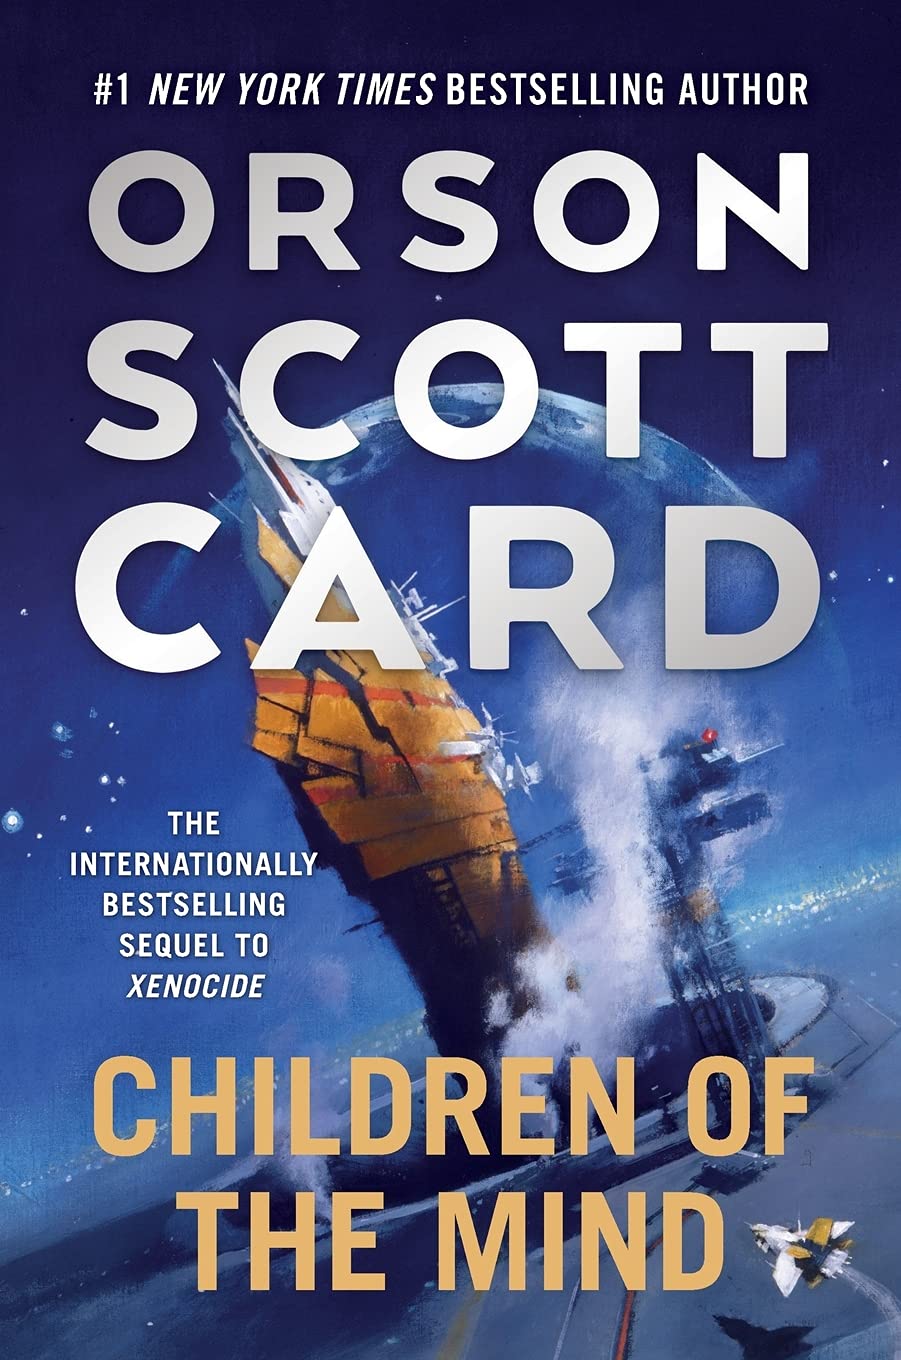 Children of the Mind by Orson Scott Card - Dead Tree Dreams Bookstore